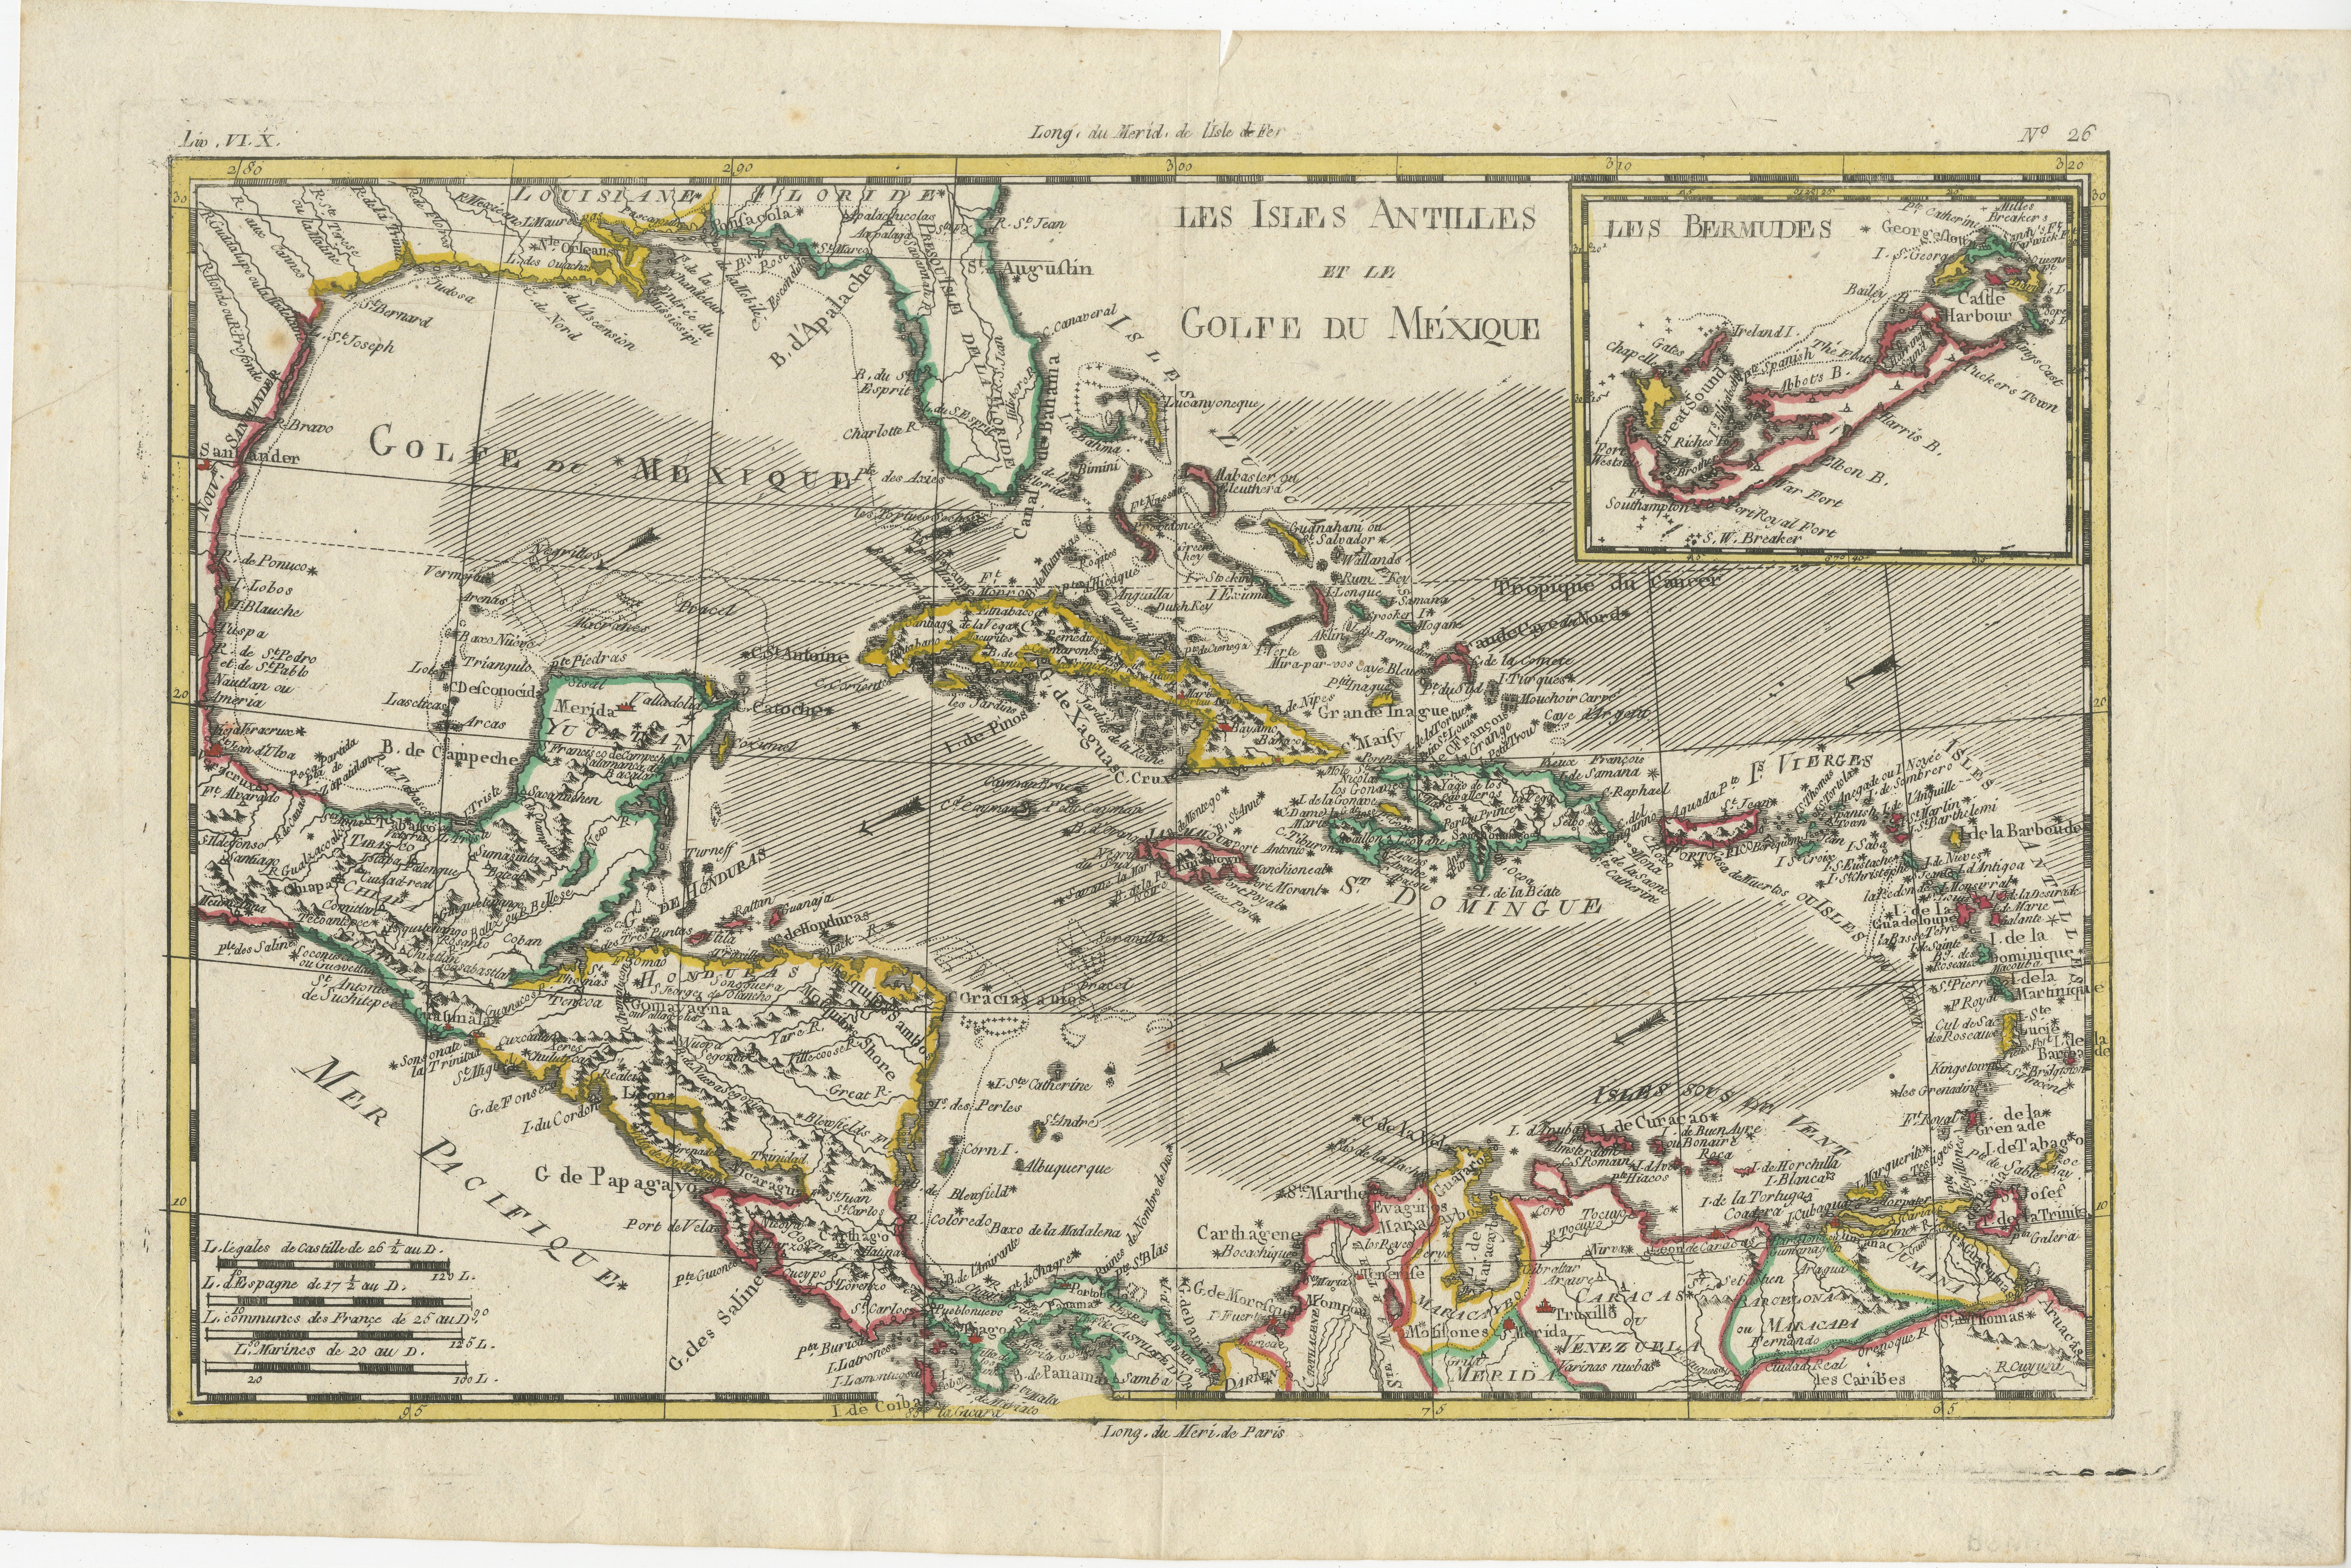 Rigobert Bonne and G. Raynal's 1780 map of the West Indies, Gulf of Mexico, Antilles, and the Caribbean stands as a remarkable cartographic piece, offering a detailed and expansive view of the region during the late 18th century.

**Title:** Map of